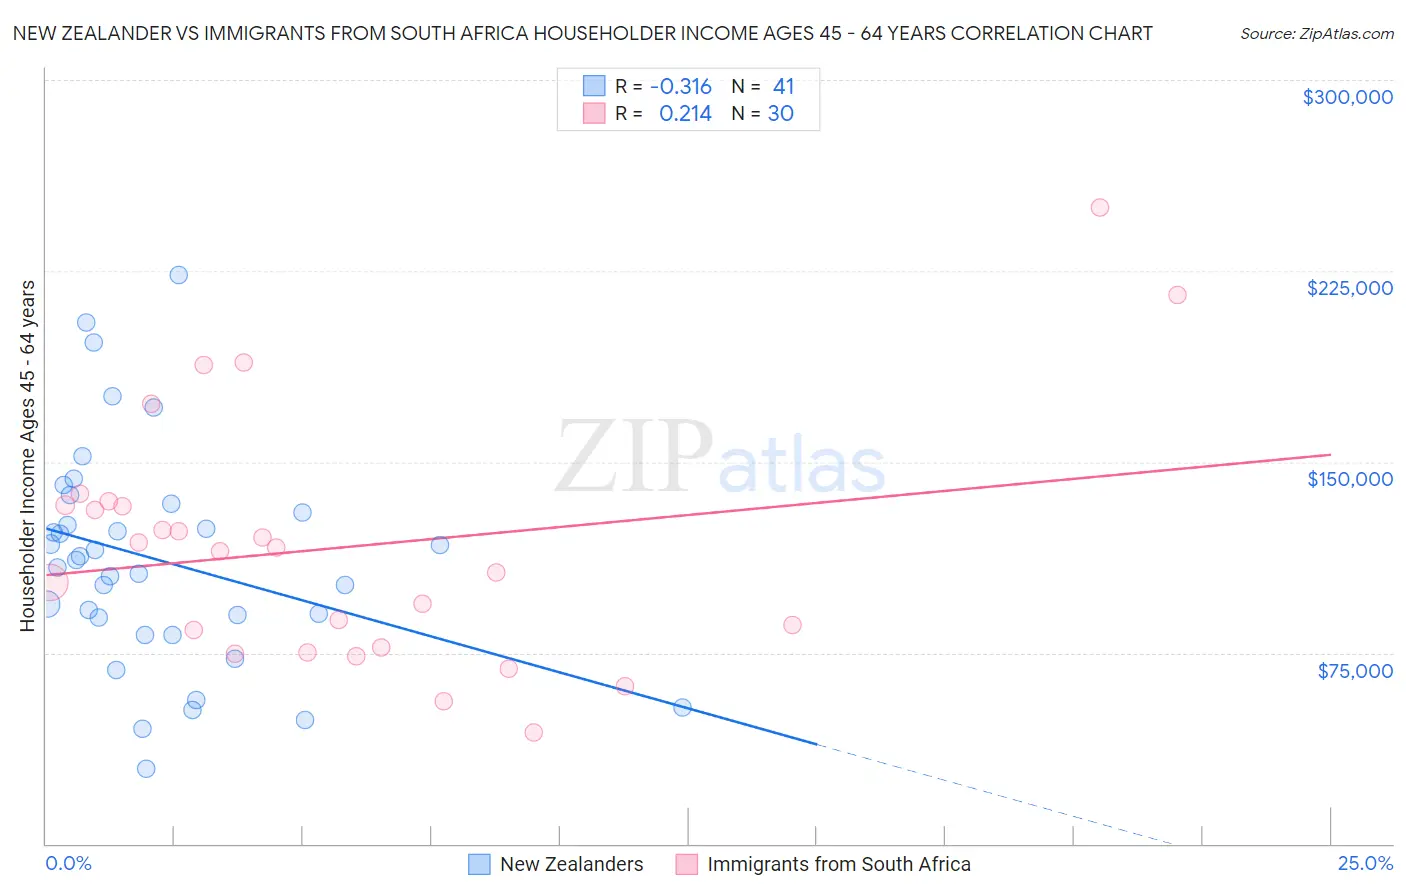 New Zealander vs Immigrants from South Africa Householder Income Ages 45 - 64 years